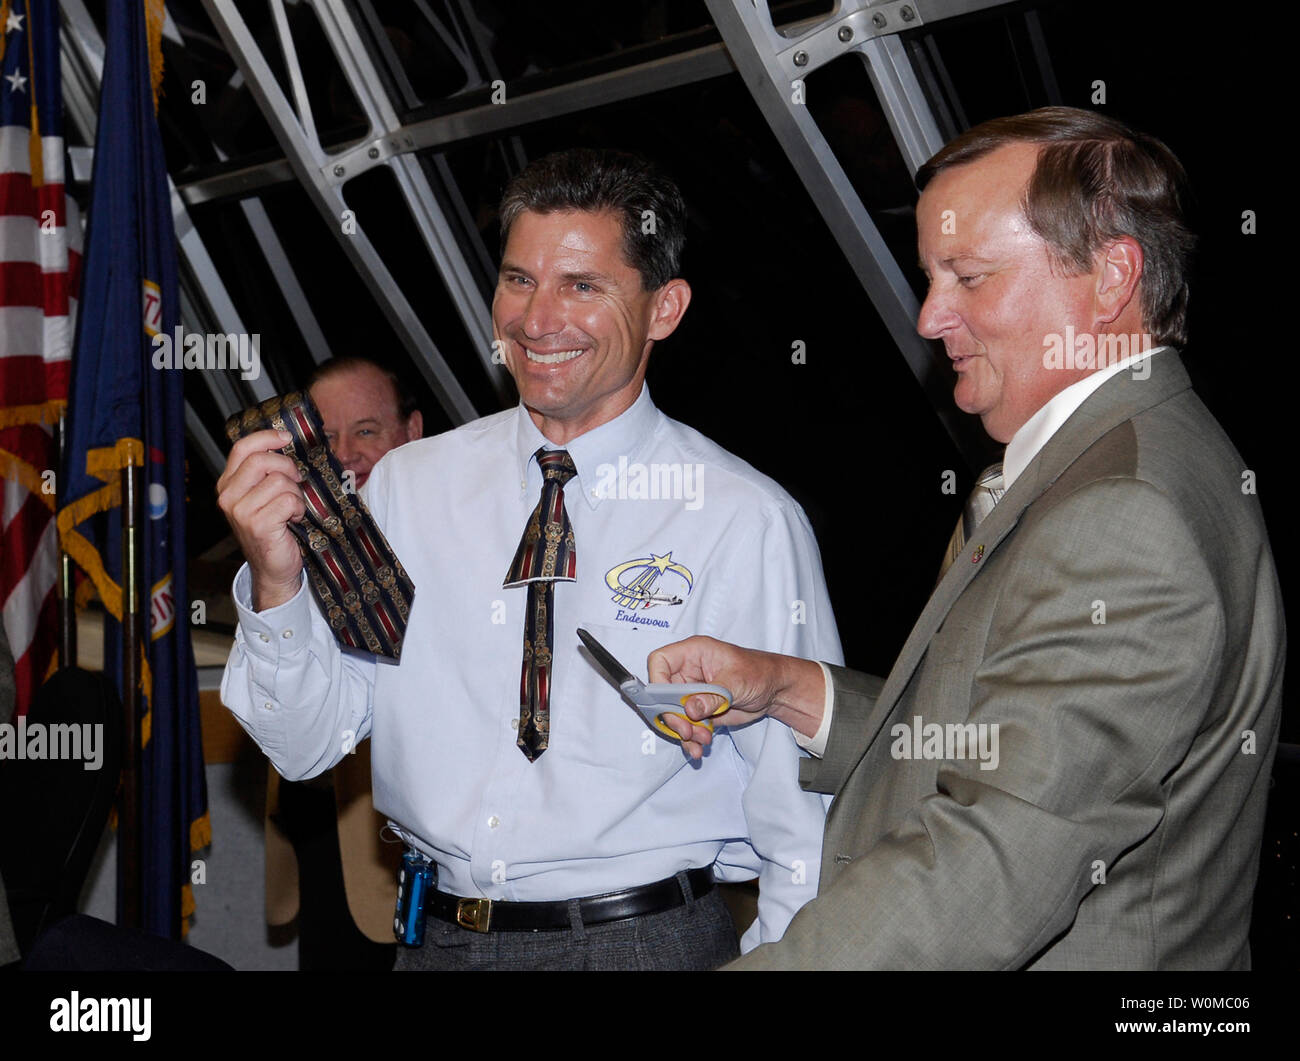 NASA Flow Director for space shuttle Endeavour, Ken Tenbusch (left) holds the tie cut by Shuttle Launch Director Mike Leinbach (right) after the successful launch of Endeavour. The tie-cutting is a tradition for first-timers.  Liftoff was on time at 2:28 a.m. EDT. The crew will make a record-breaking 16-day mission to the International Space Station and deliver the first section of the Japan Aerospace Exploration Agency's Kibo laboratory and the Canadian Space Agency's two-armed robotic system, Dextre.   (UPI Photo/NASA/Kim Shiflett) Stock Photo